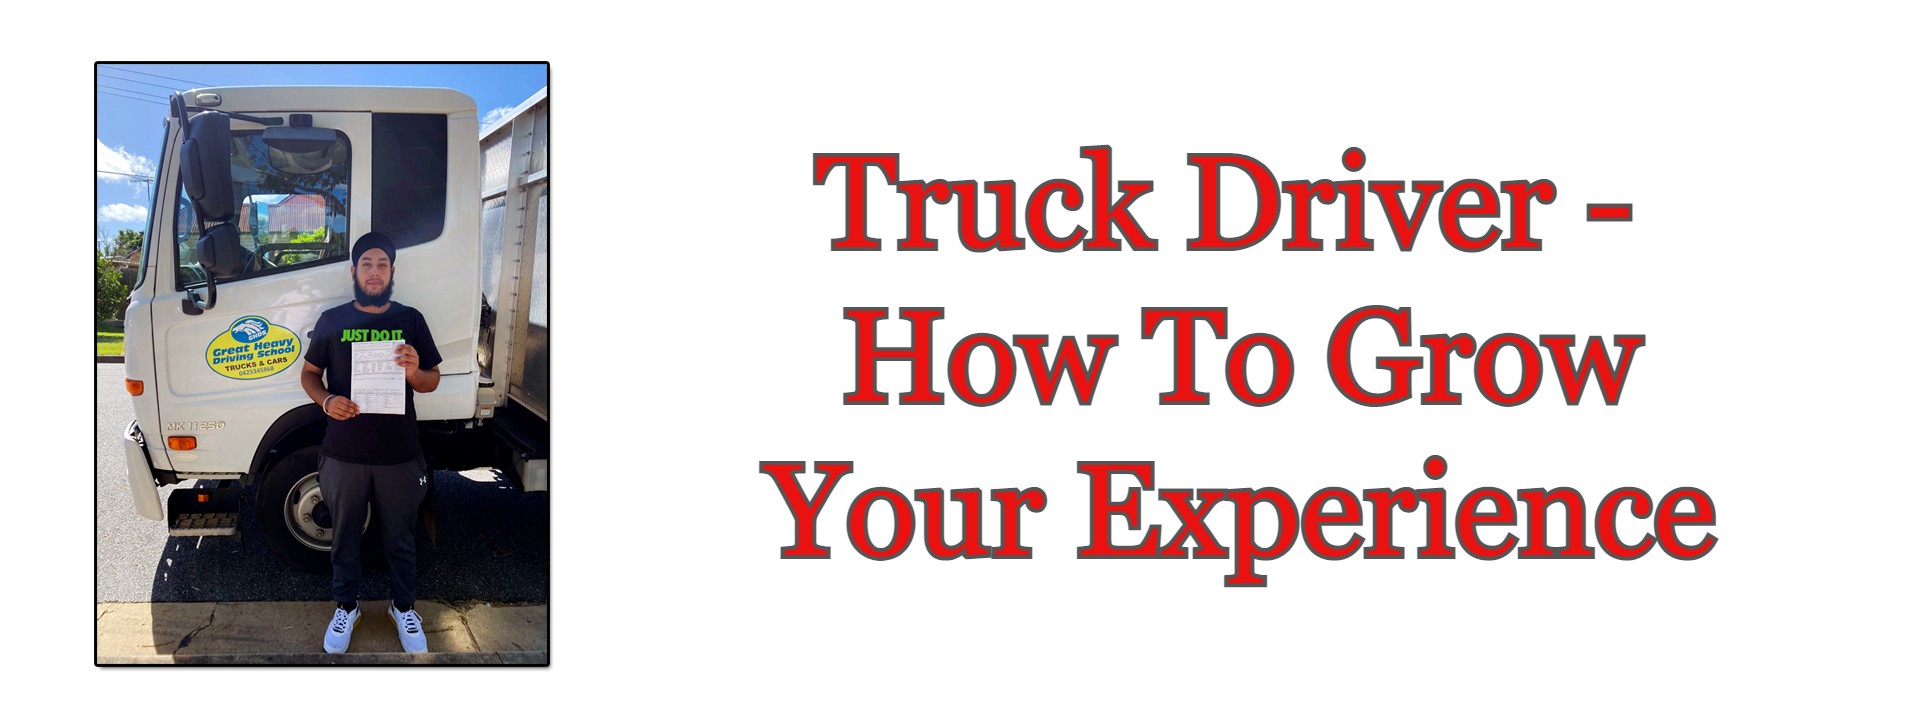 Truck Driver: How To Grow Your Experience